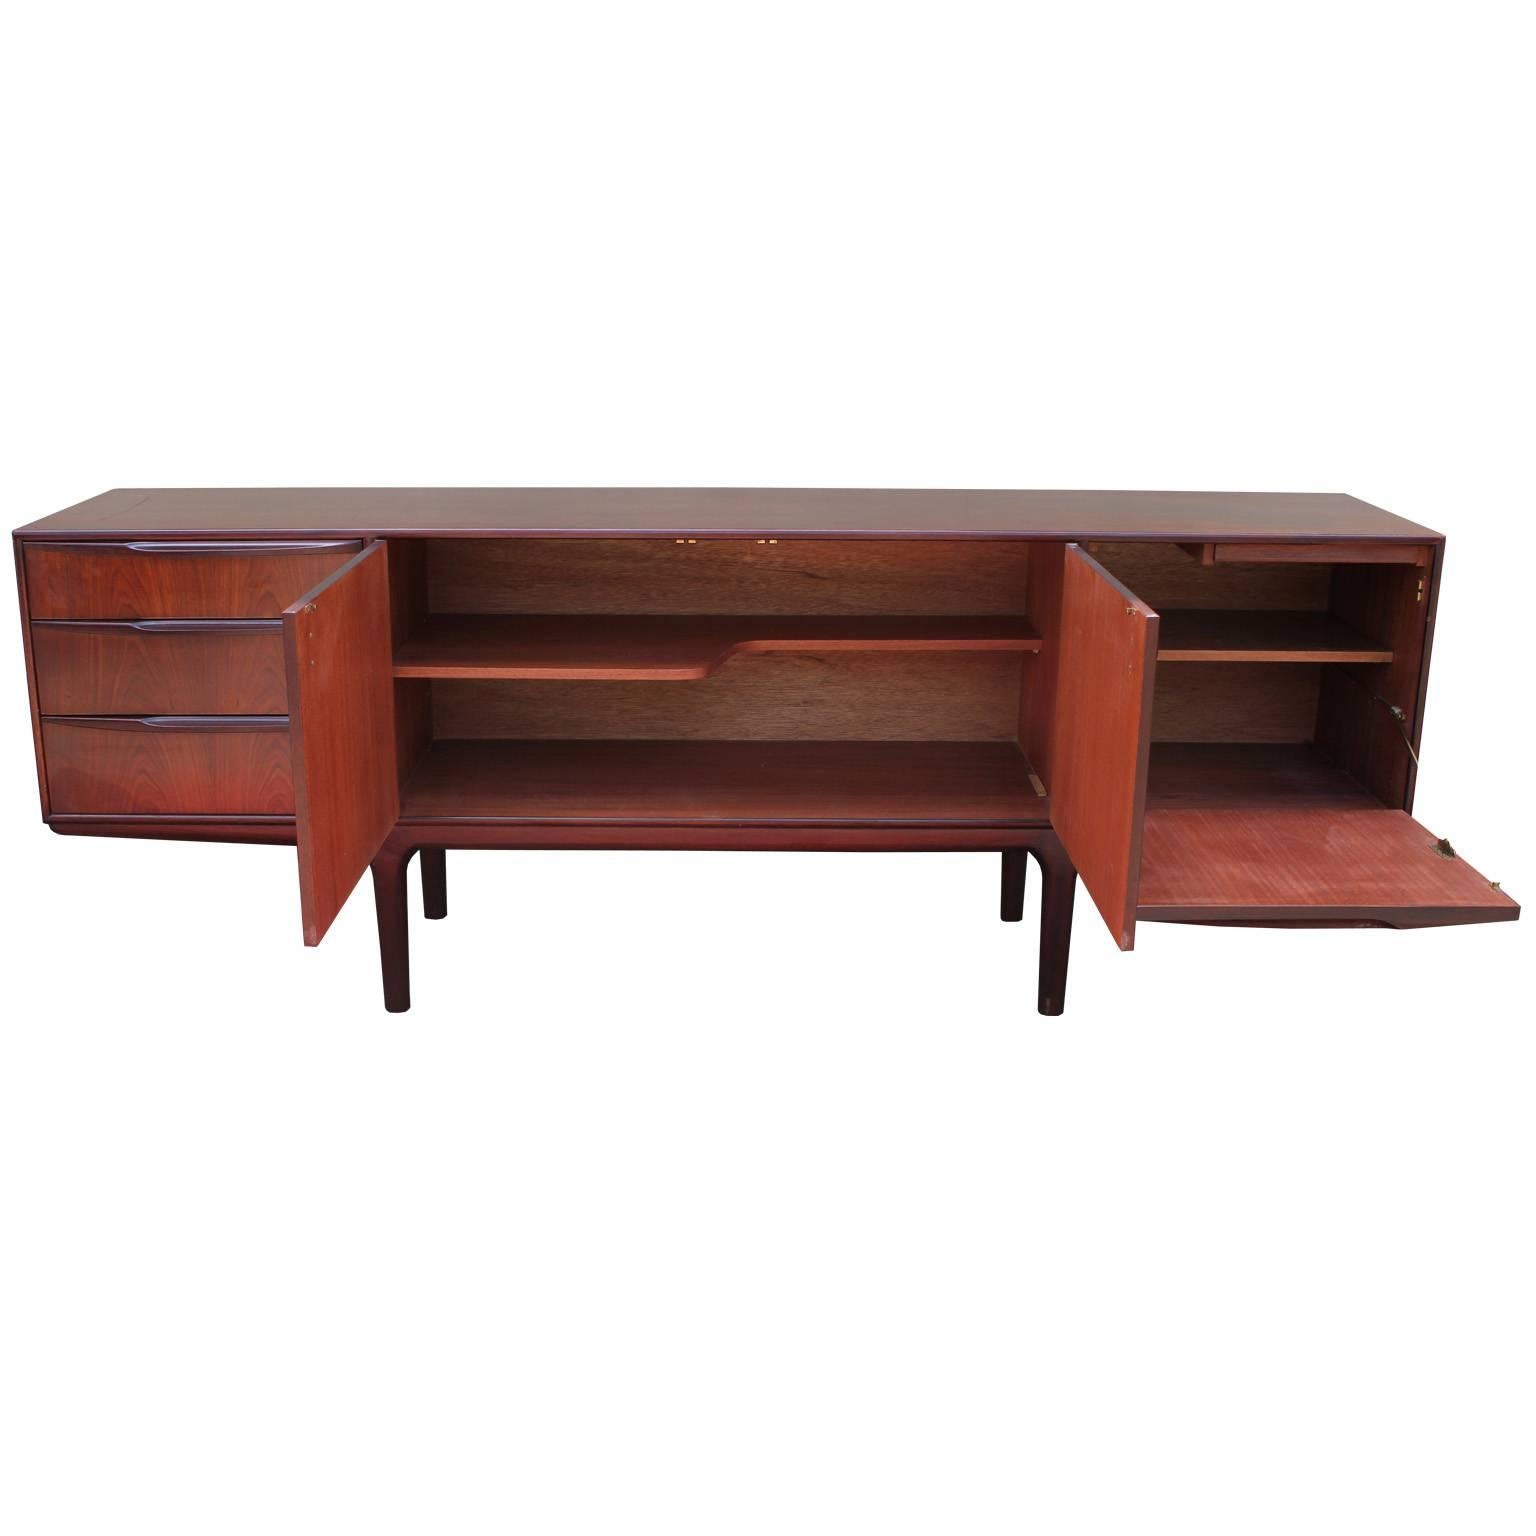 Fabulous McIntosh teakwood sideboard or credenza. Top of three drawers is slotted and lined for service. Two center cabinet doors open to reveal a shelf. Cabinet door on the right drops down to reveal a single shelf. Teak has an almost rosewood feel